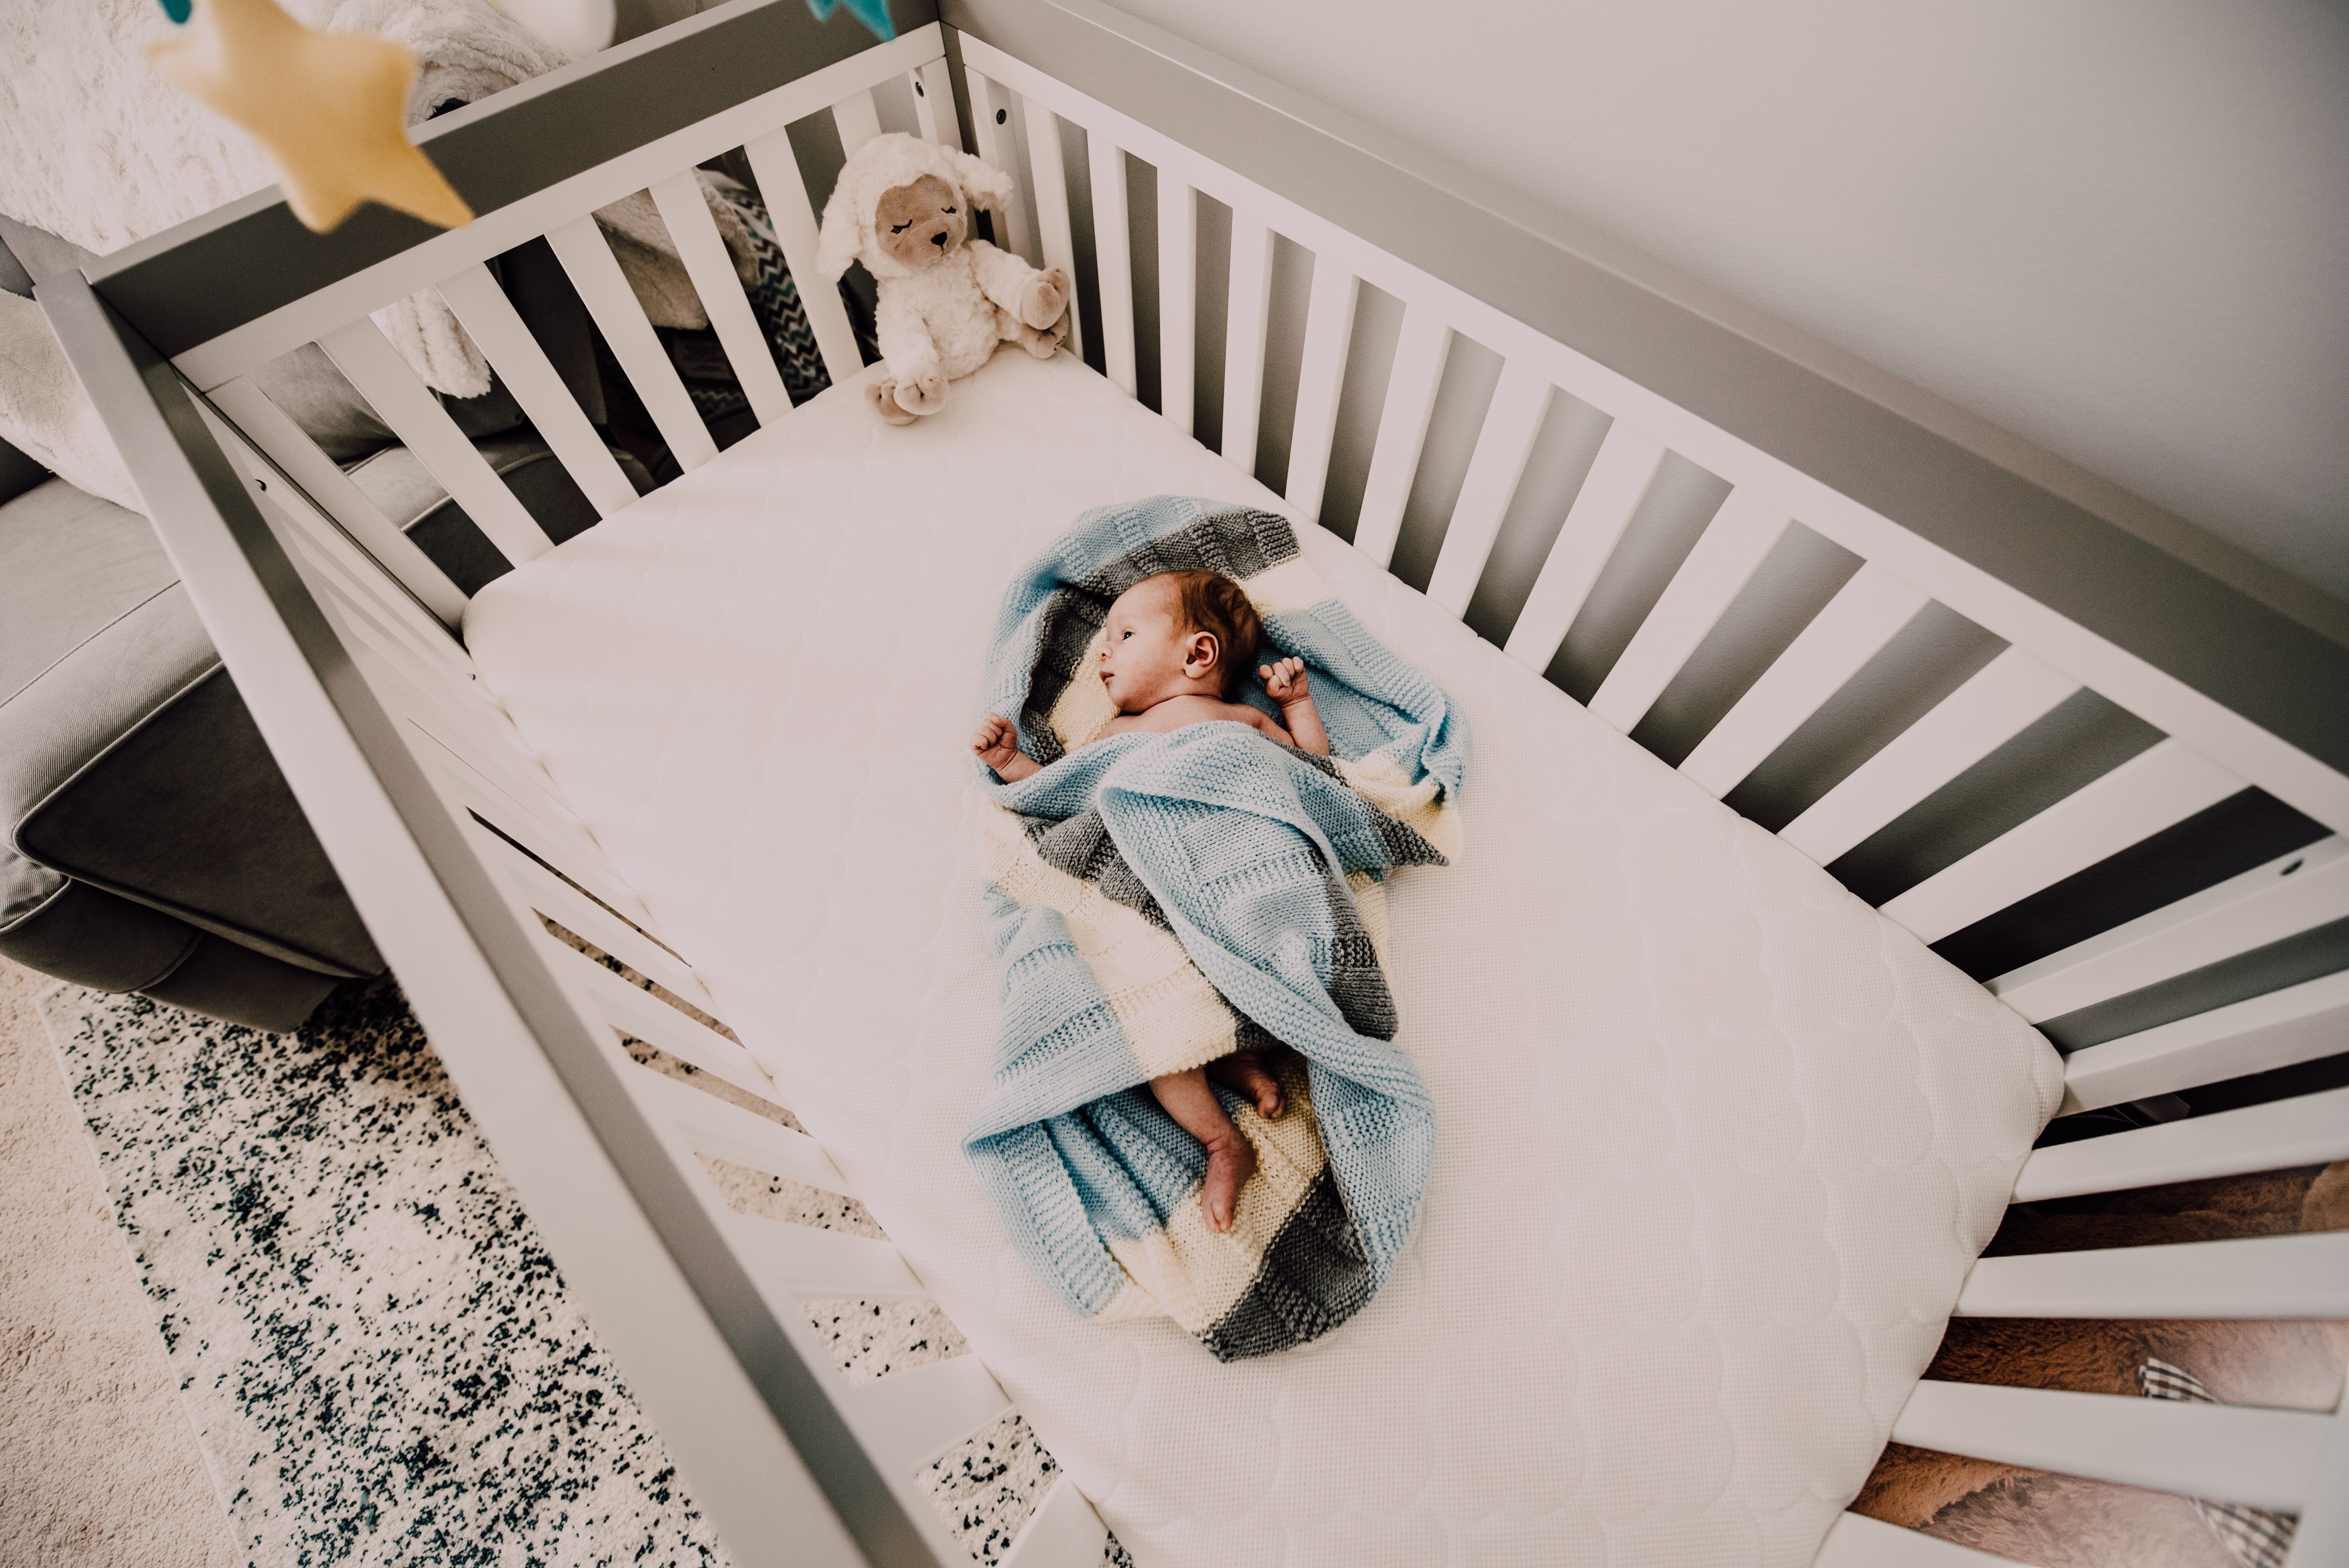 A baby wrapped in a blue blanket sleeping in a crib. | Photo: Pexels/Alicia